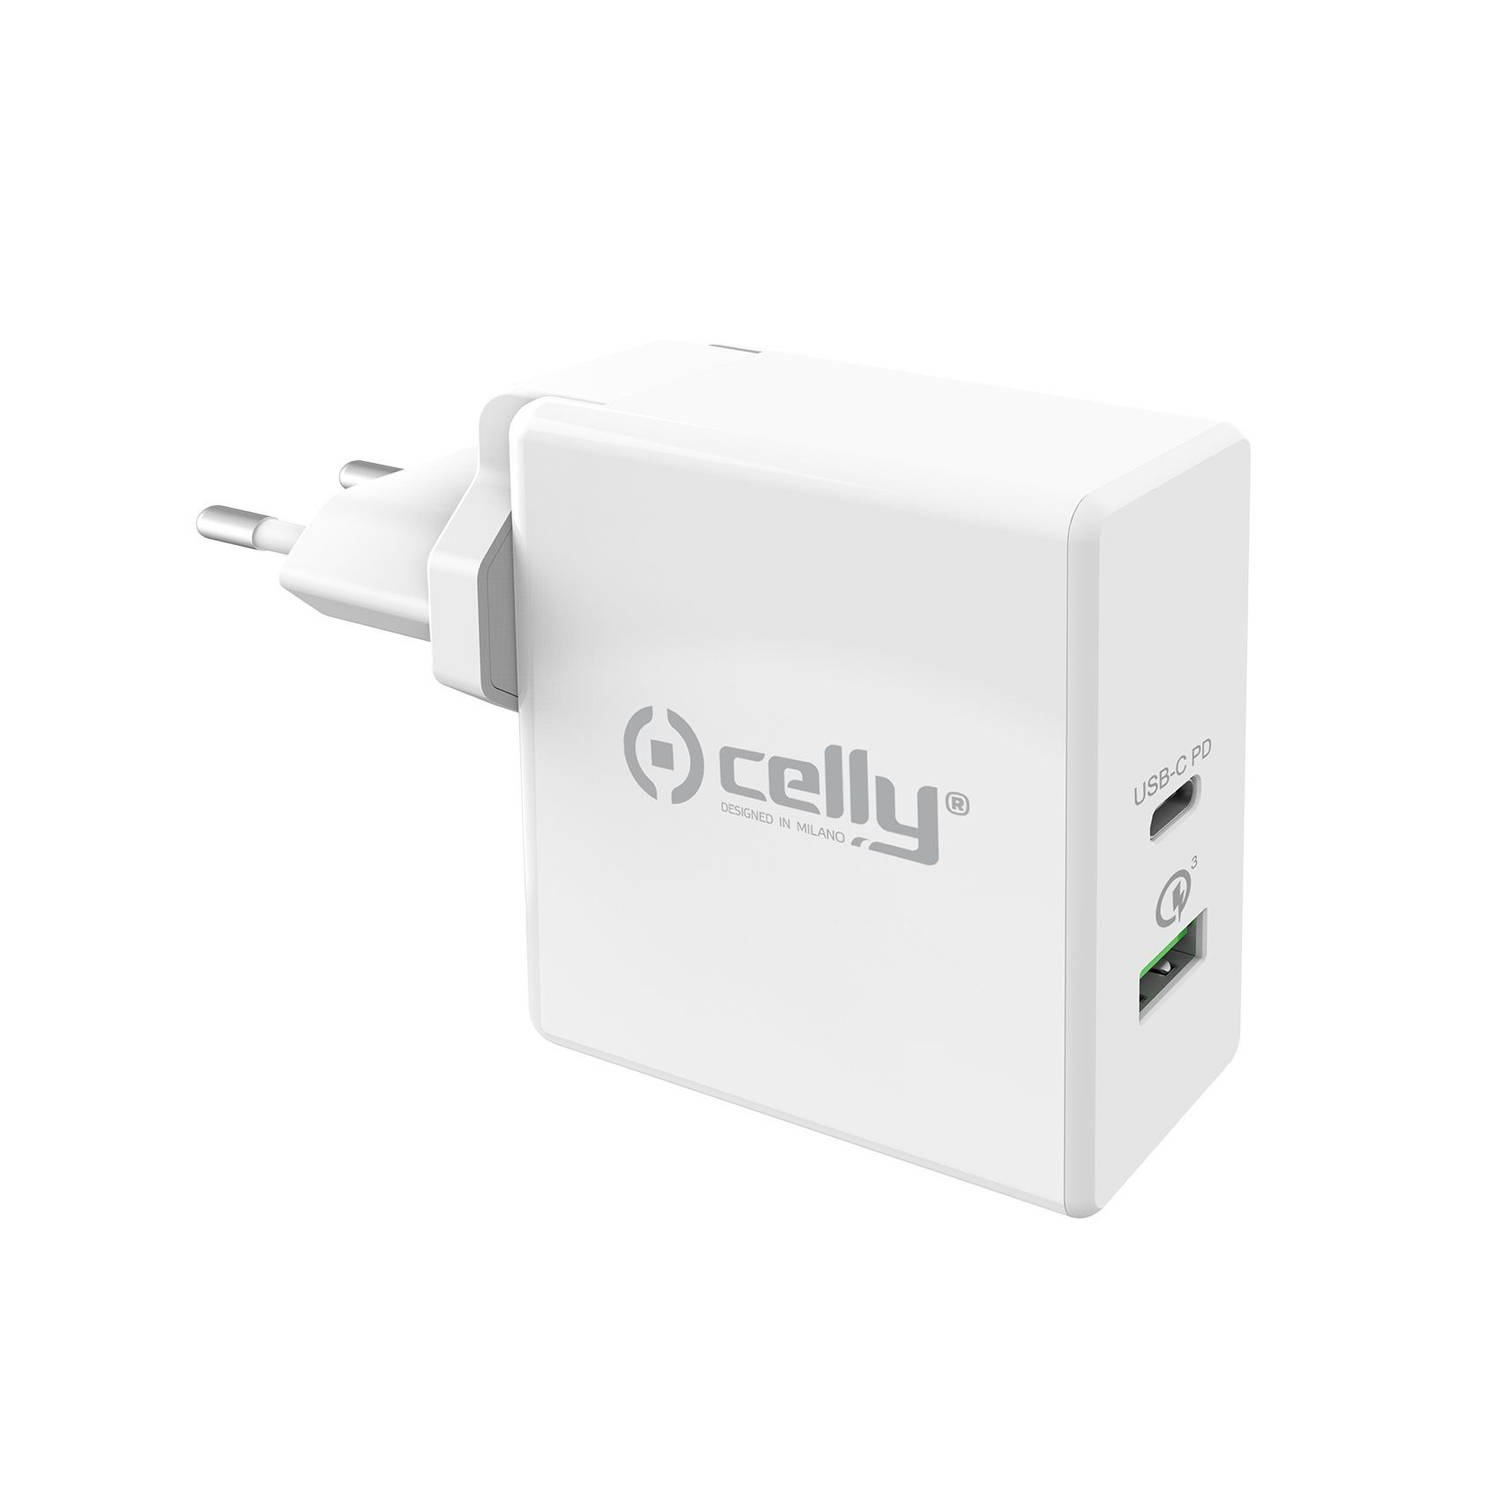 Celly - Power Delivery Lichtnetadapter 30W voor USB en USB-C - Celly